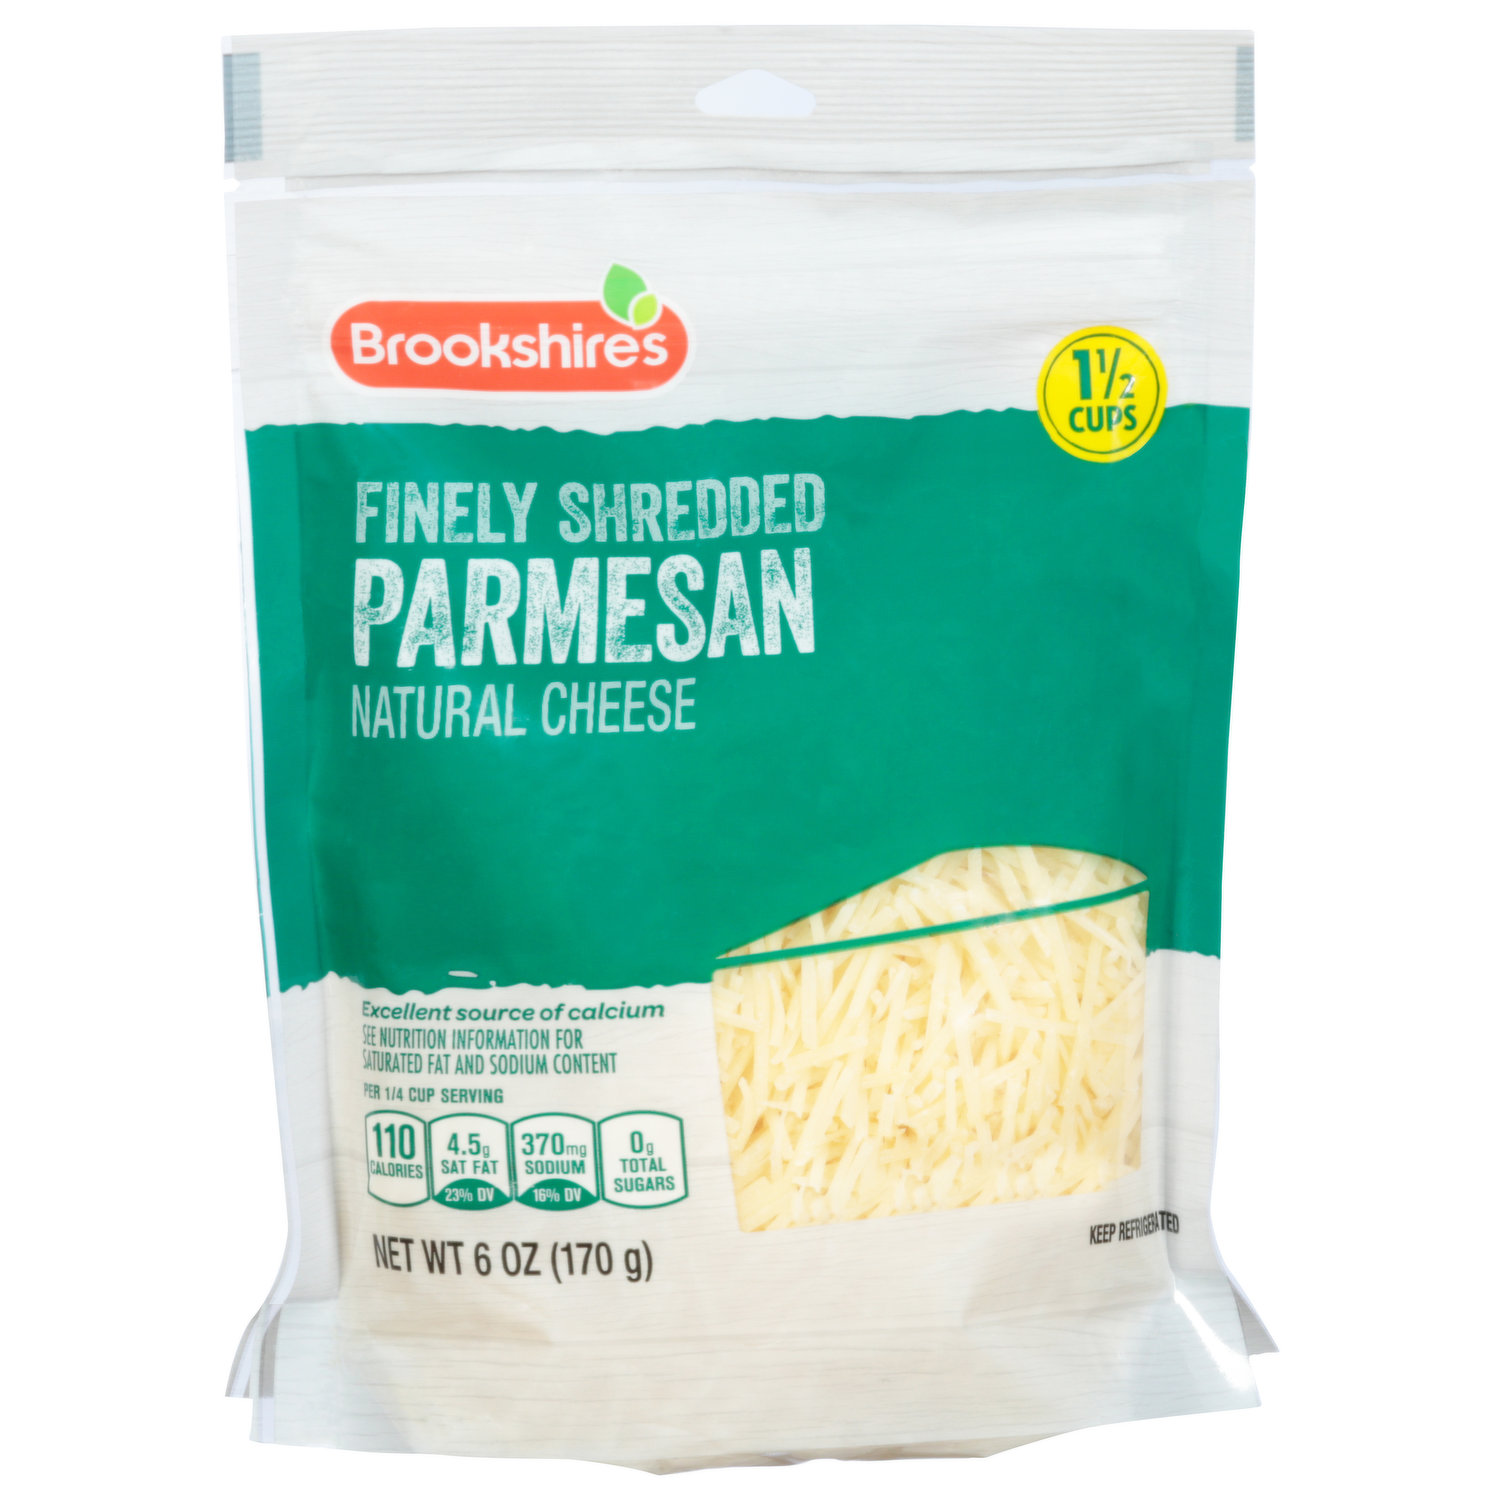 Is Domestic Parmesan Cheese Worth Using?